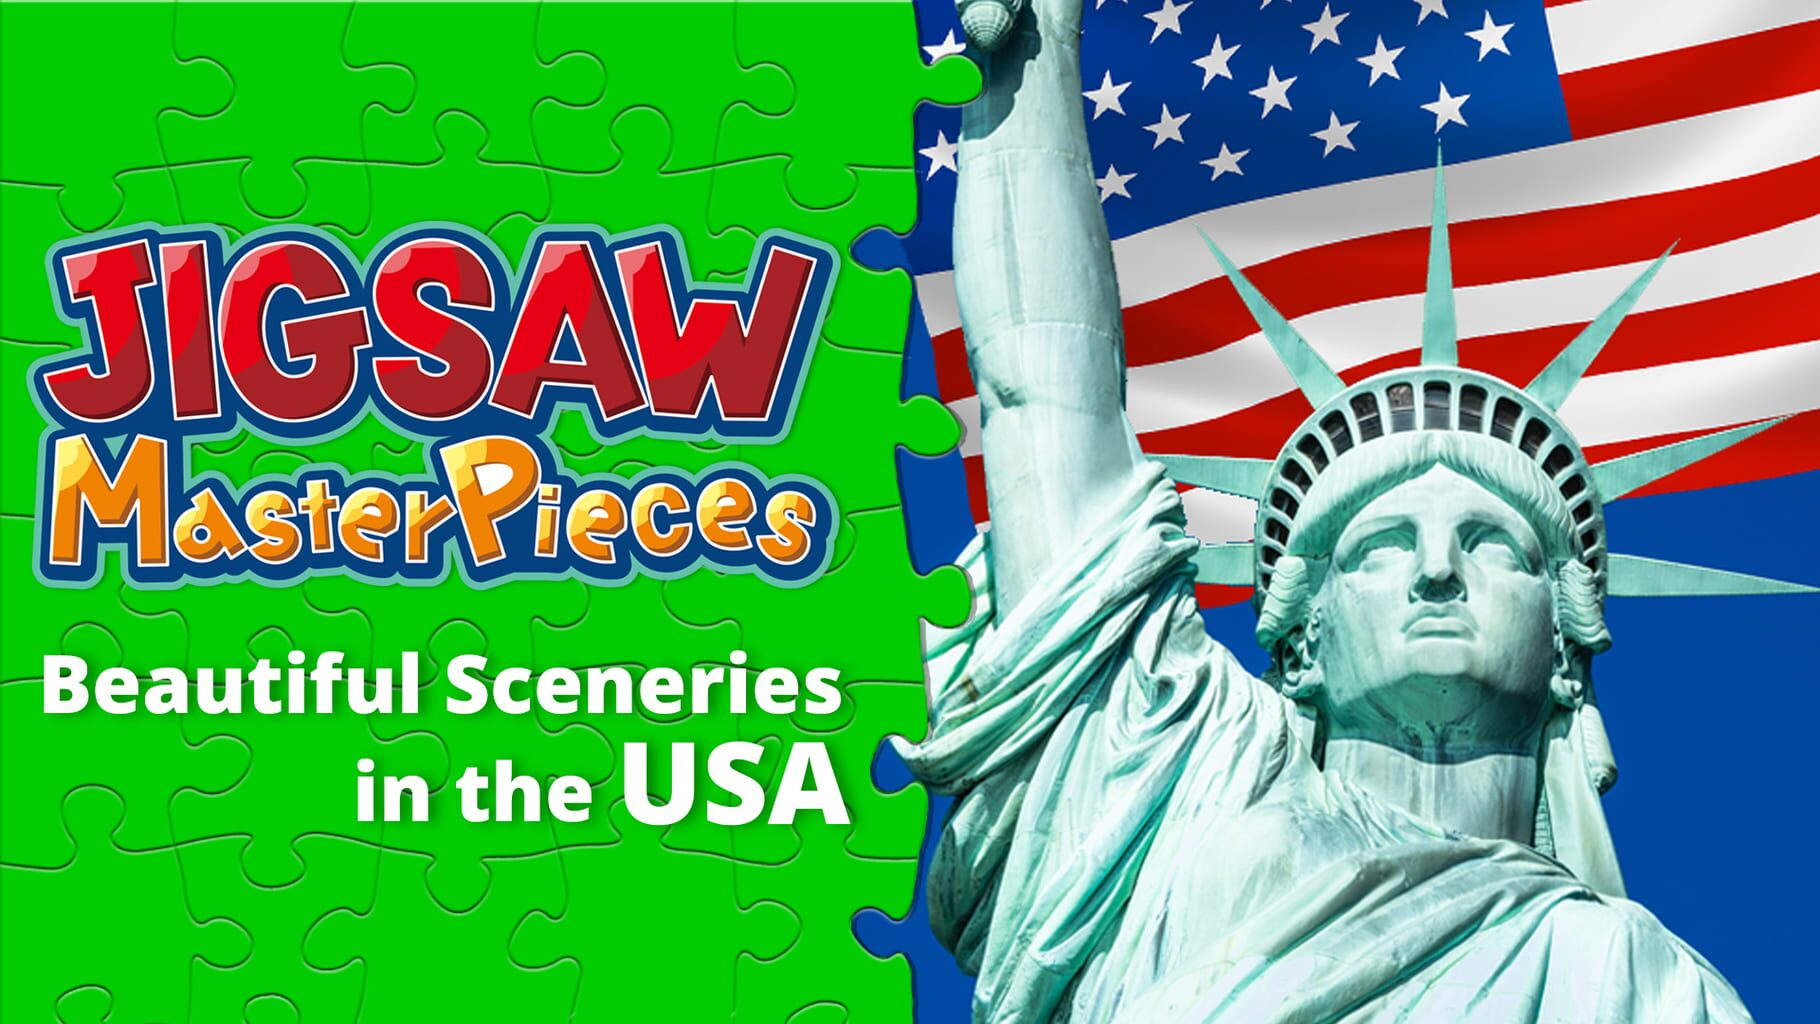 Jigsaw Masterpieces: Beautiful Sceneries in the USA artwork